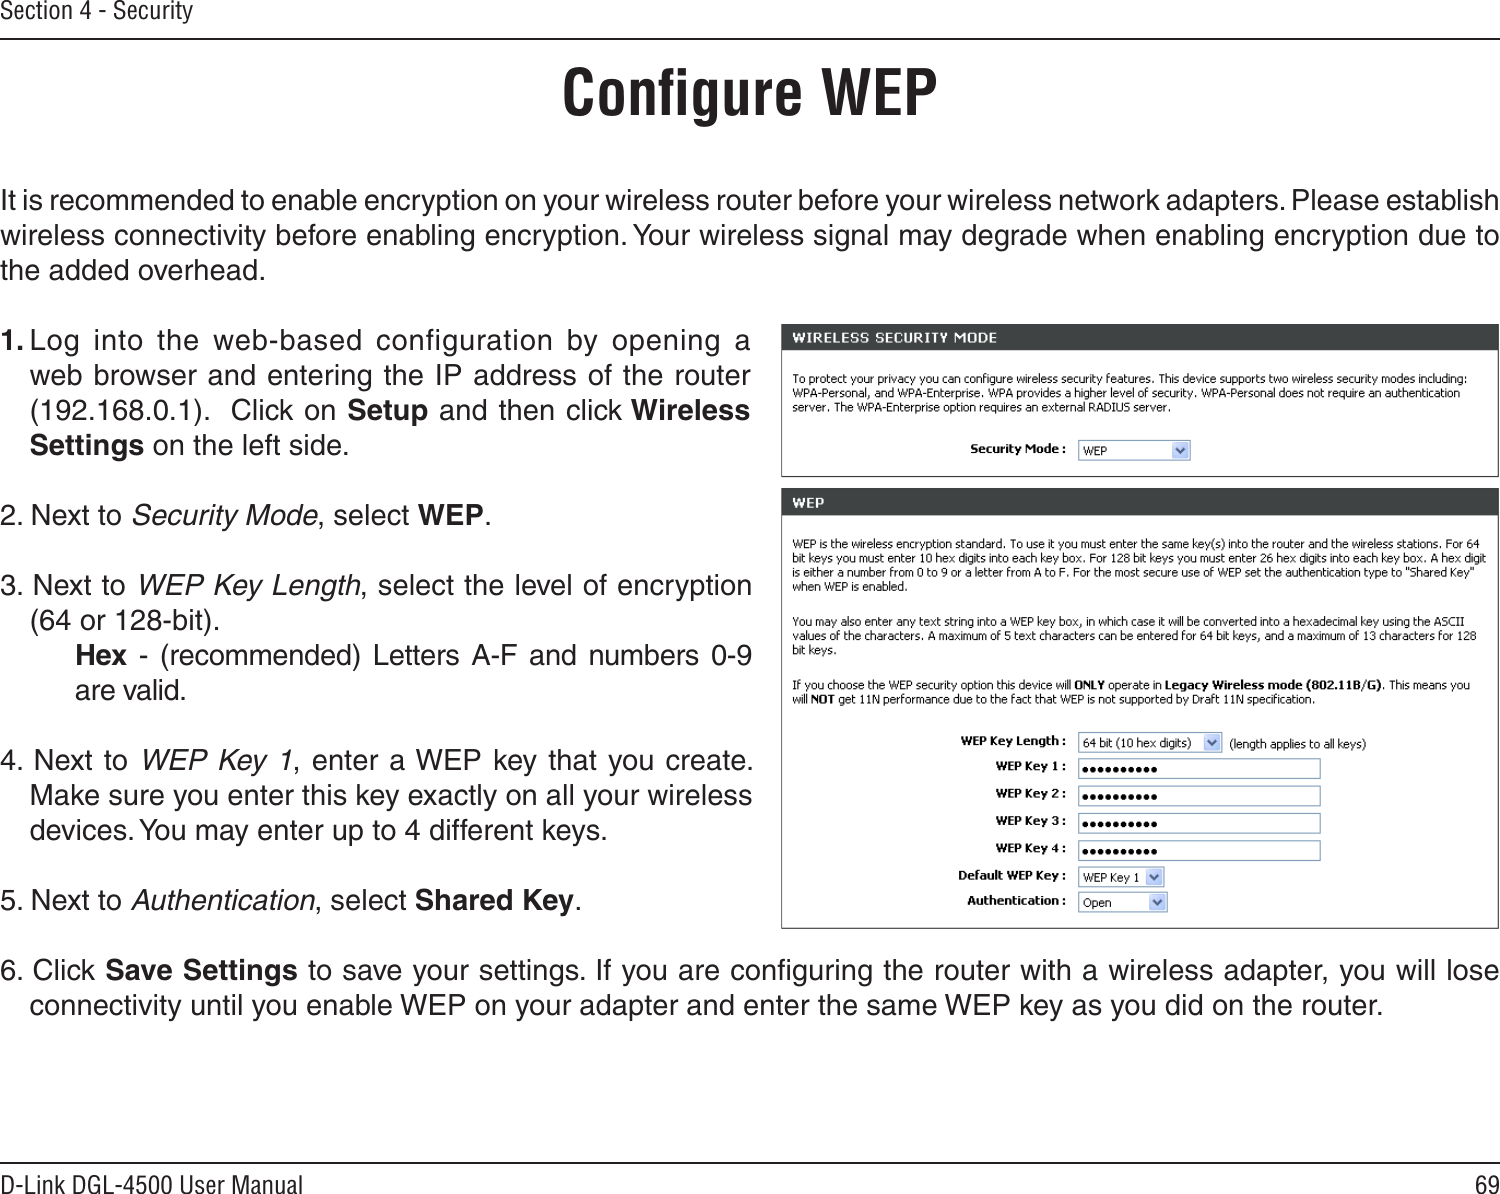 69D-Link DGL-4500 User ManualSection 4 - SecurityConﬁgure WEPIt is recommended to enable encryption on your wireless router before your wireless network adapters. Please establish wireless connectivity before enabling encryption. Your wireless signal may degrade when enabling encryption due to the added overhead.1. Log  into  the  web-based  configuration  by  opening  a web browser and entering the IP address of the router (192.168.0.1).  Click on Setup and then click Wireless Settings on the left side.2. Next to Security Mode, select WEP.3. Next to WEP Key Length, select the level of encryption (64 or 128-bit).    Hex - (recommended)  Letters  A-F  and numbers  0-9    are valid.   4. Next to WEP Key 1, enter a WEP key that you create. Make sure you enter this key exactly on all your wireless devices. You may enter up to 4 different keys.5. Next to Authentication, select Shared Key.6. Click Save Settings to save your settings. If you are conﬁguring the router with a wireless adapter, you will lose connectivity until you enable WEP on your adapter and enter the same WEP key as you did on the router.